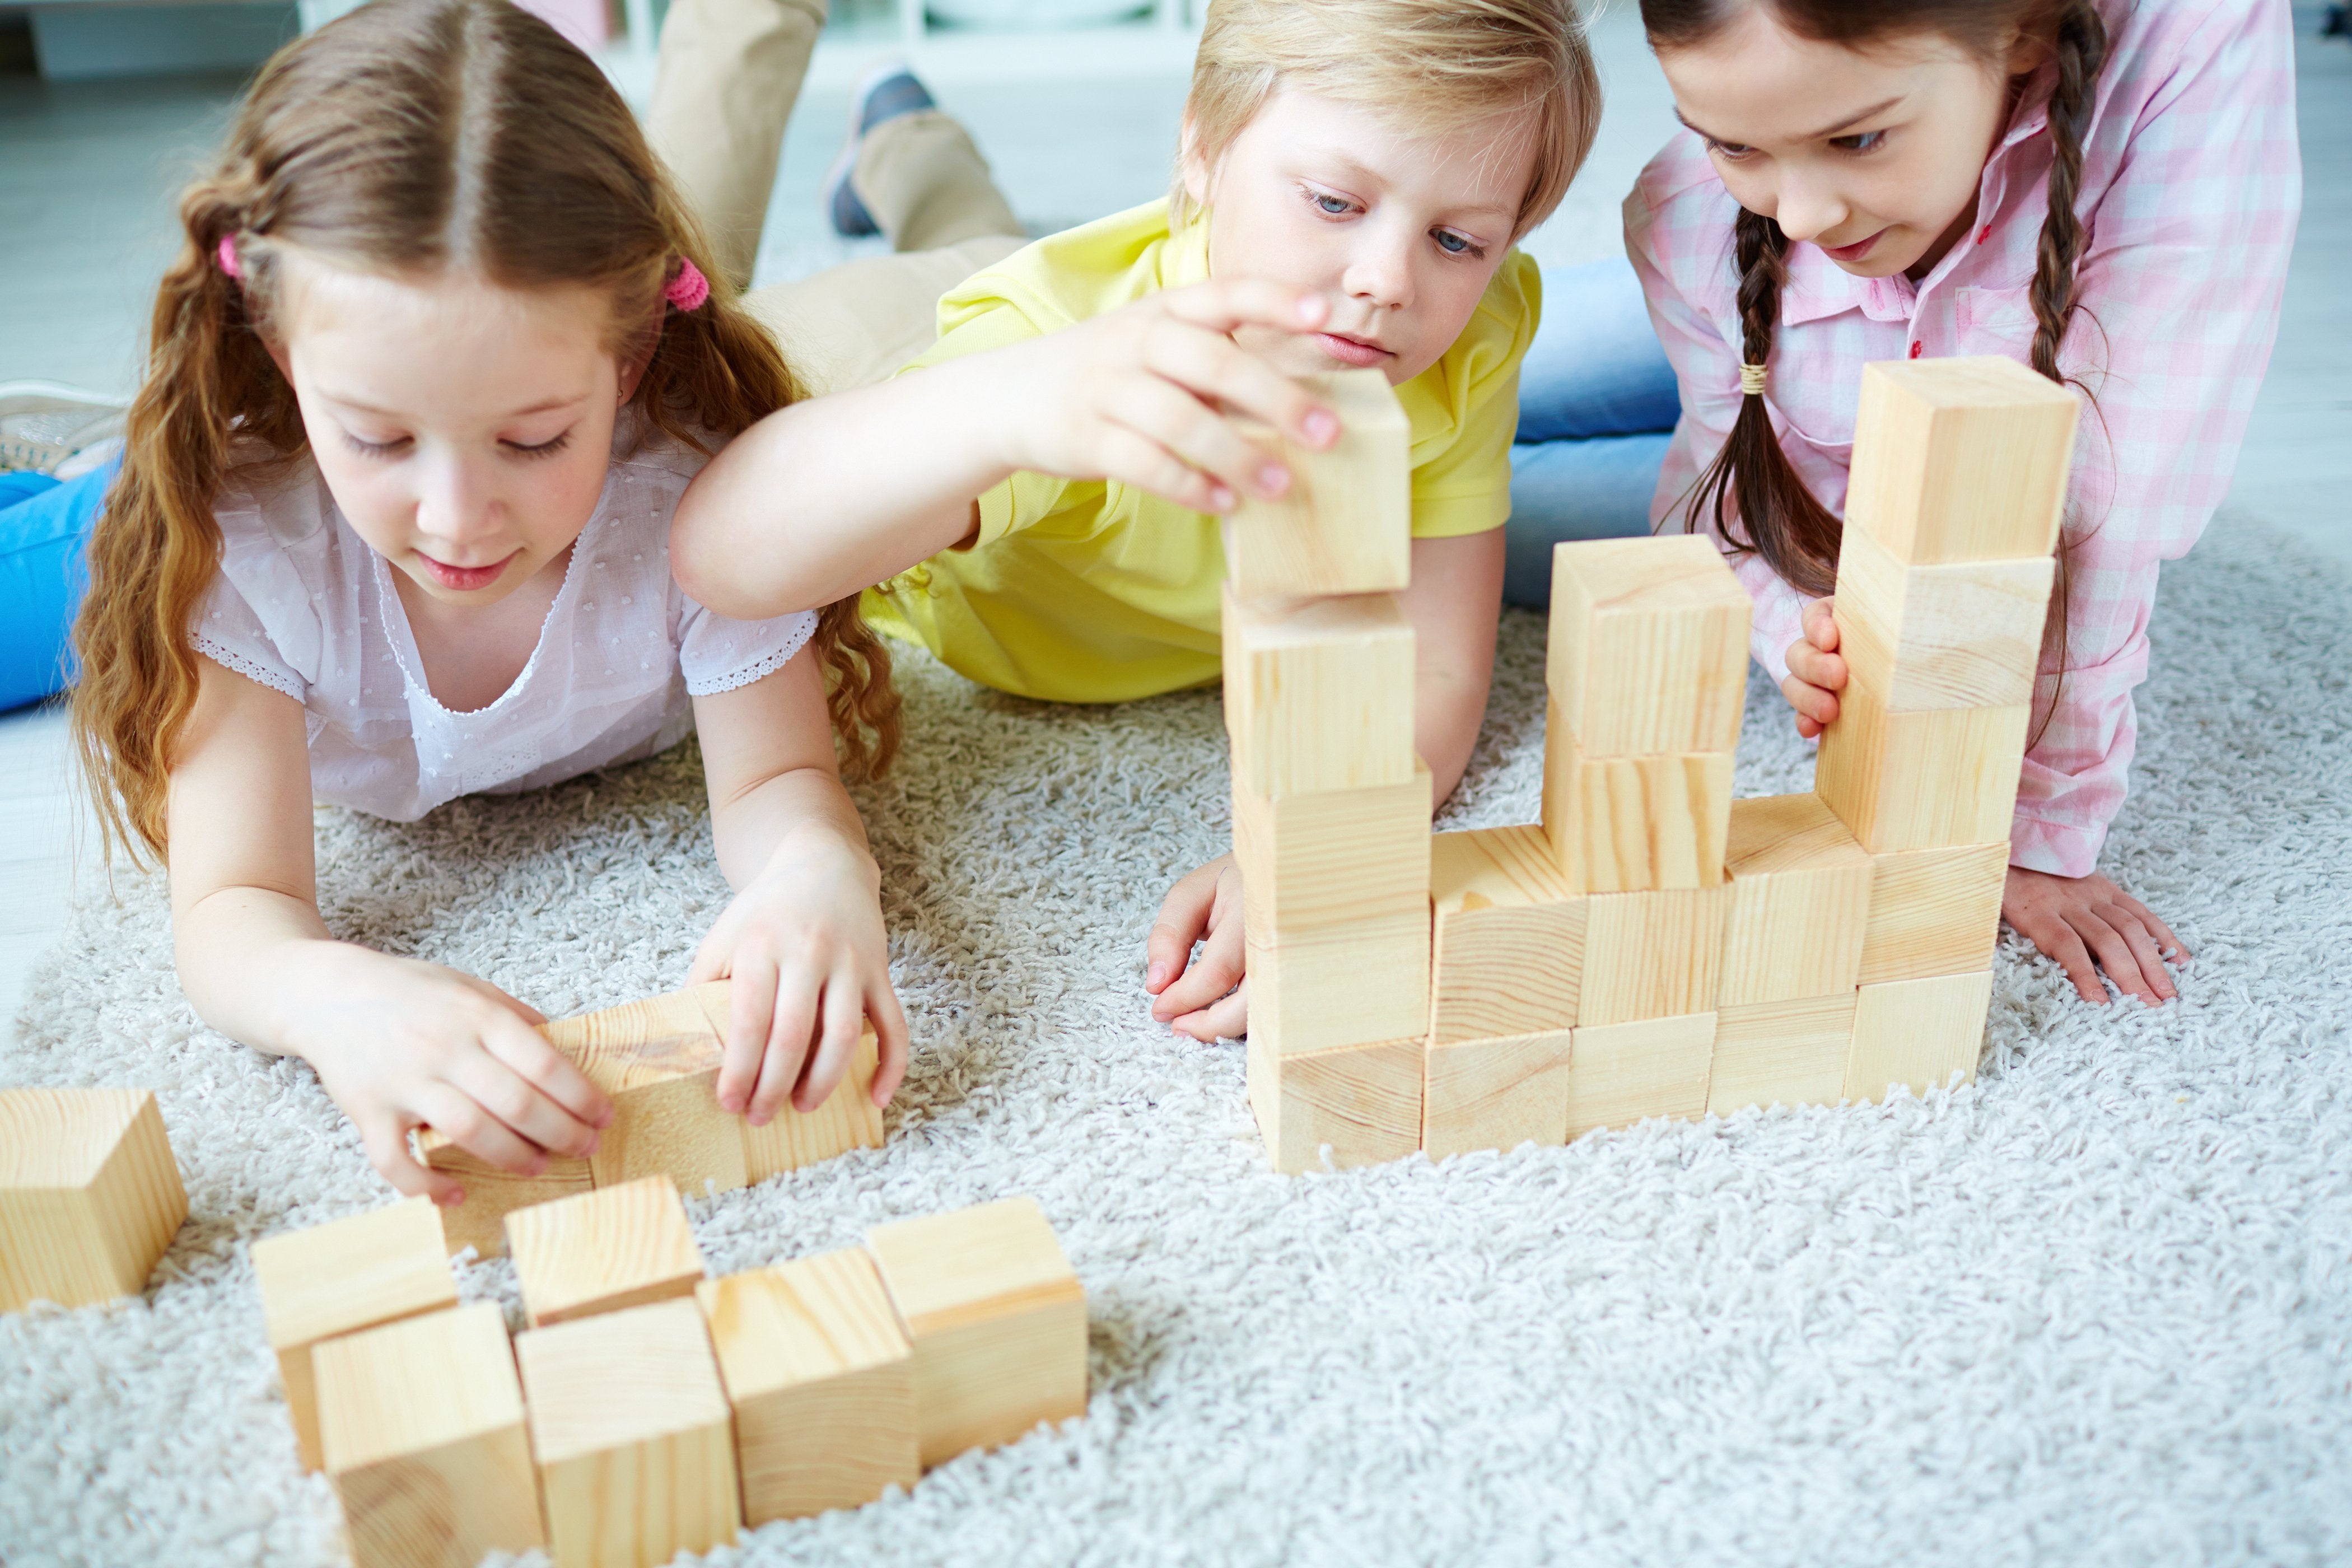  Three children are playing on the floor with wooden blocks and books.